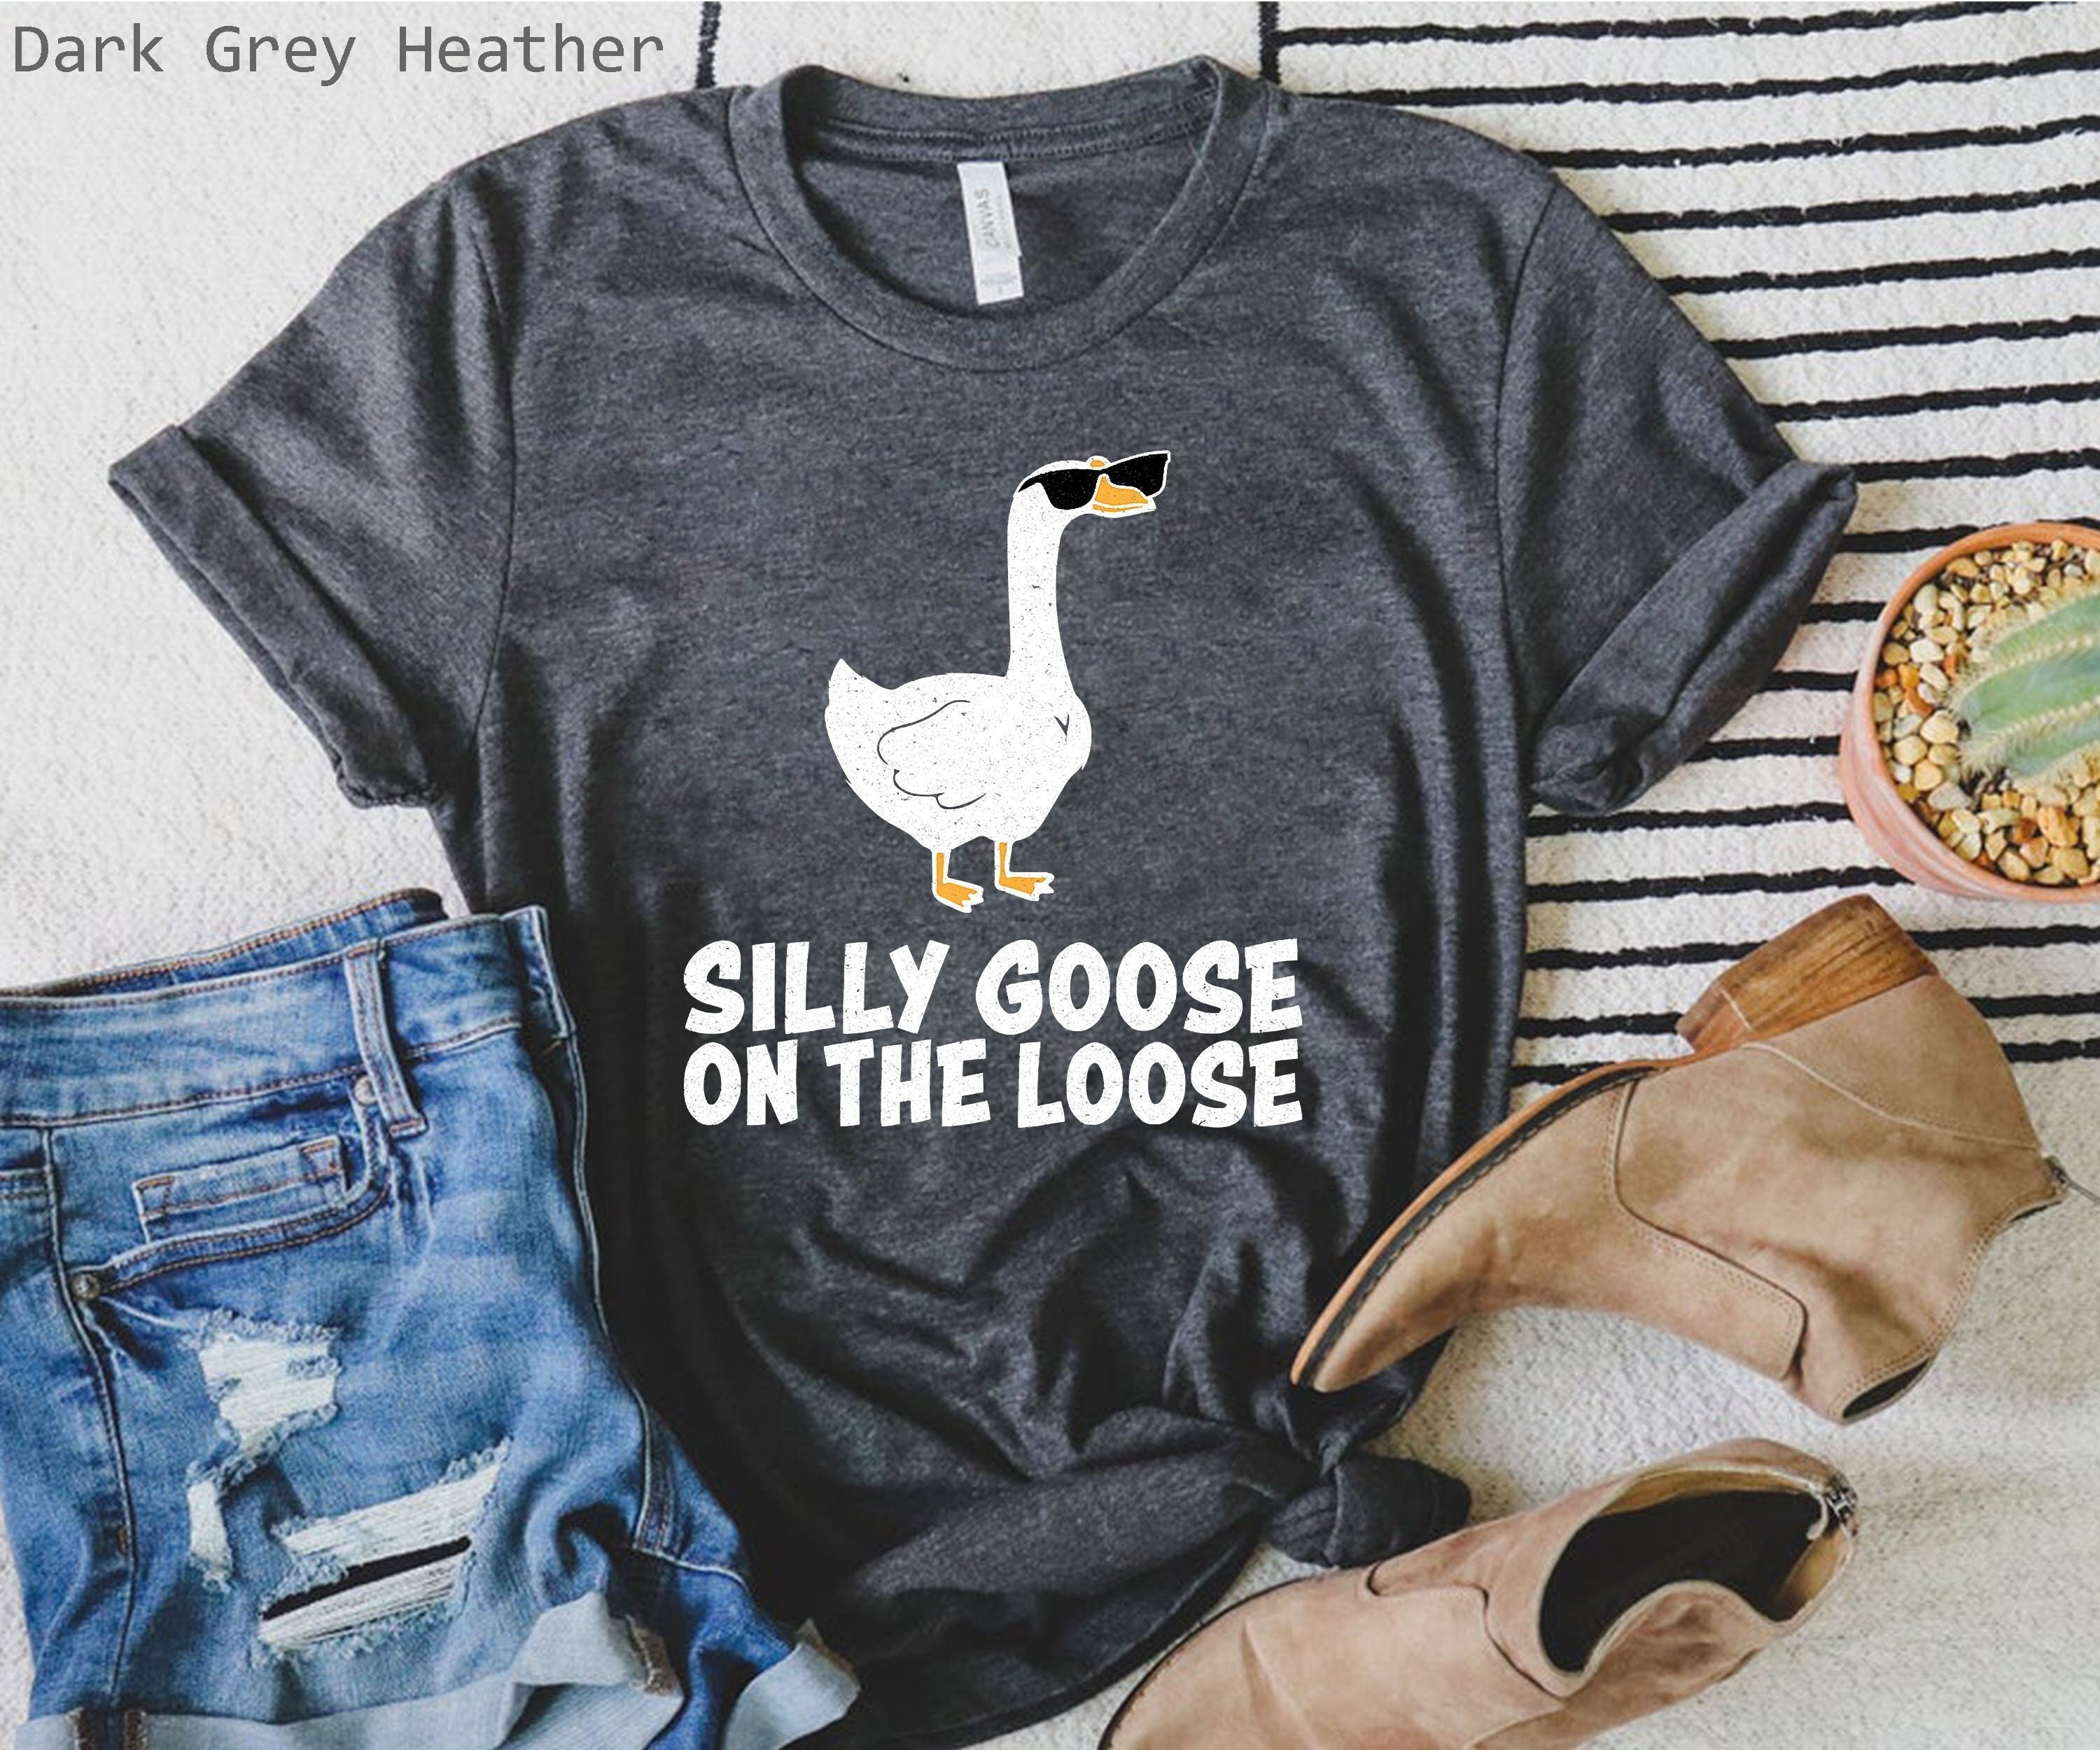 Discover Silly Goose On The Loose T-Shirt, Silly Goose Shirt, Funny Goose